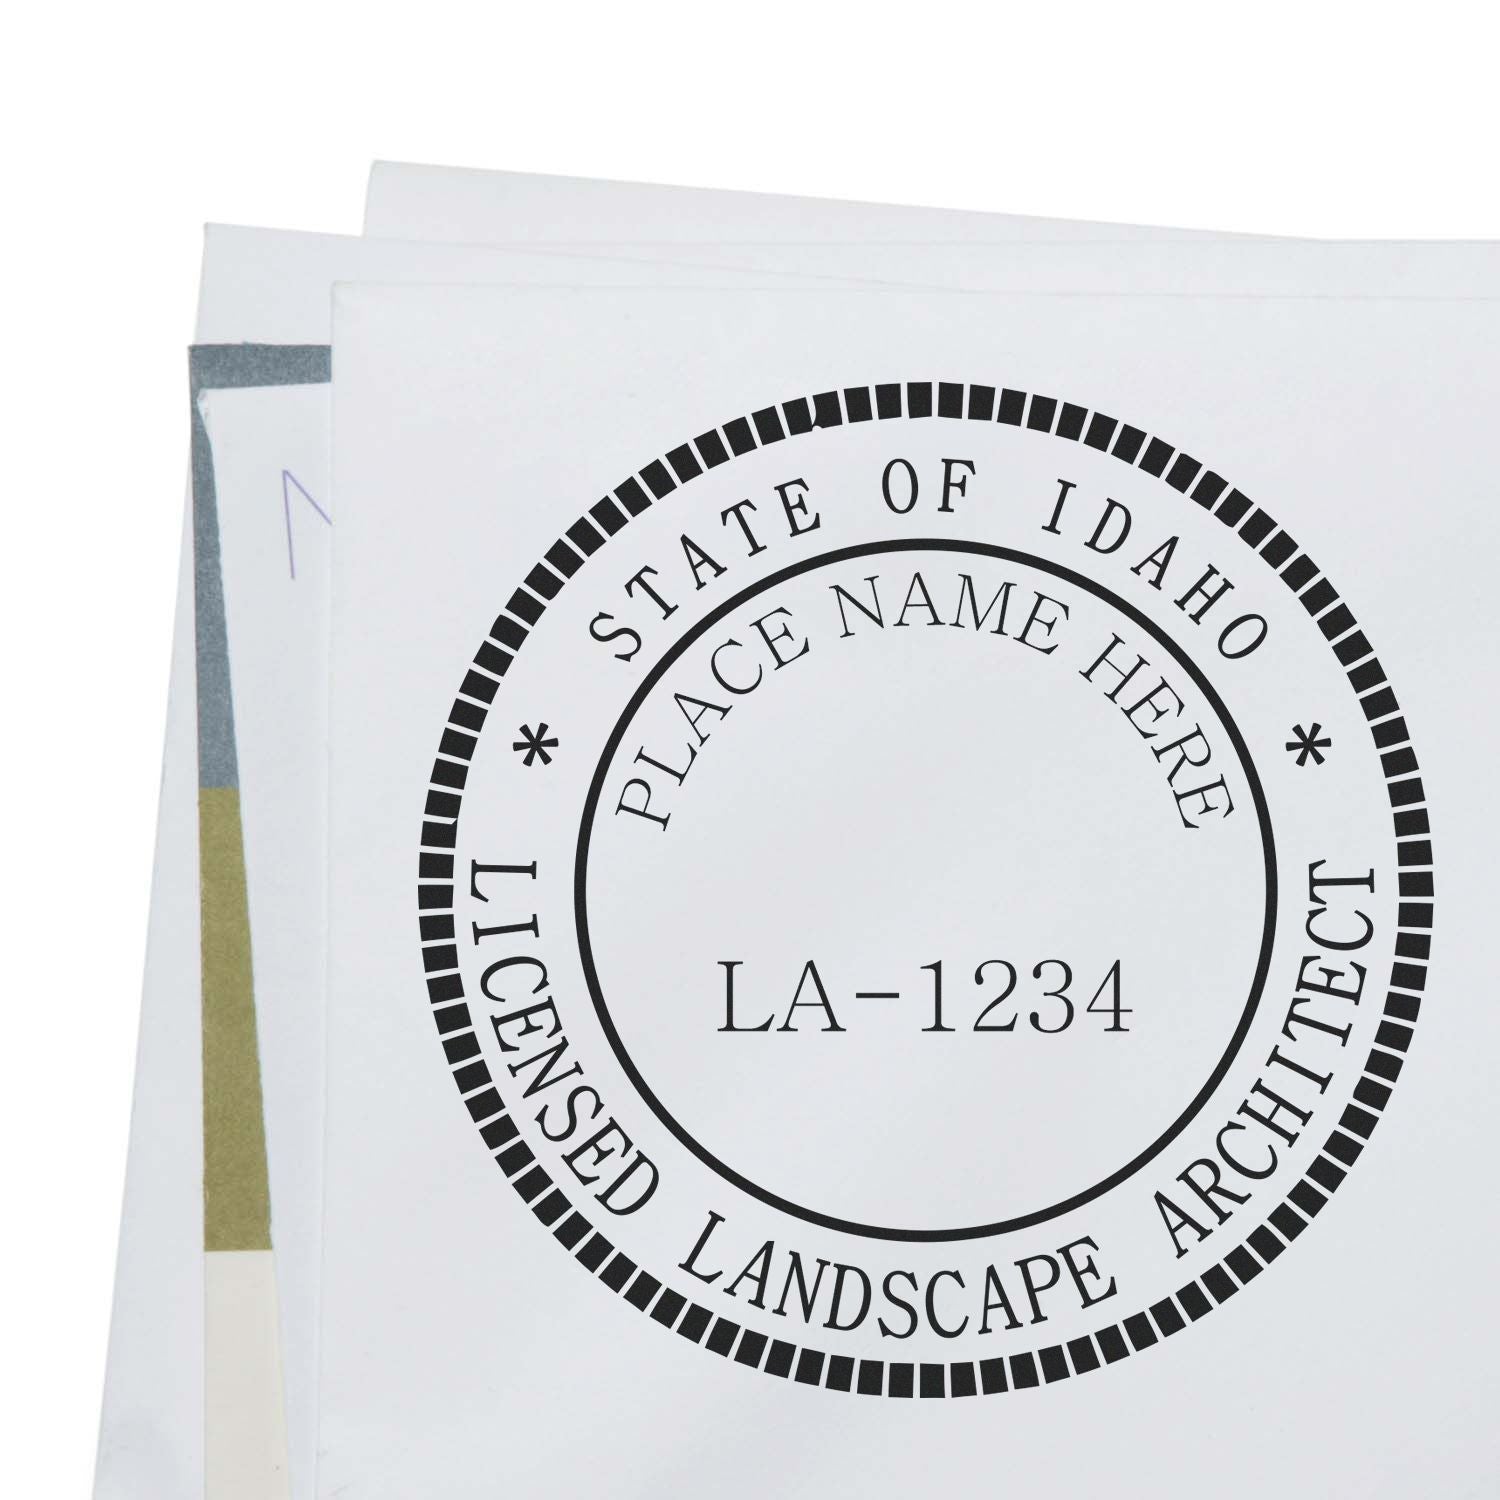 A lifestyle photo showing a stamped image of the Digital Idaho Landscape Architect Stamp on a piece of paper